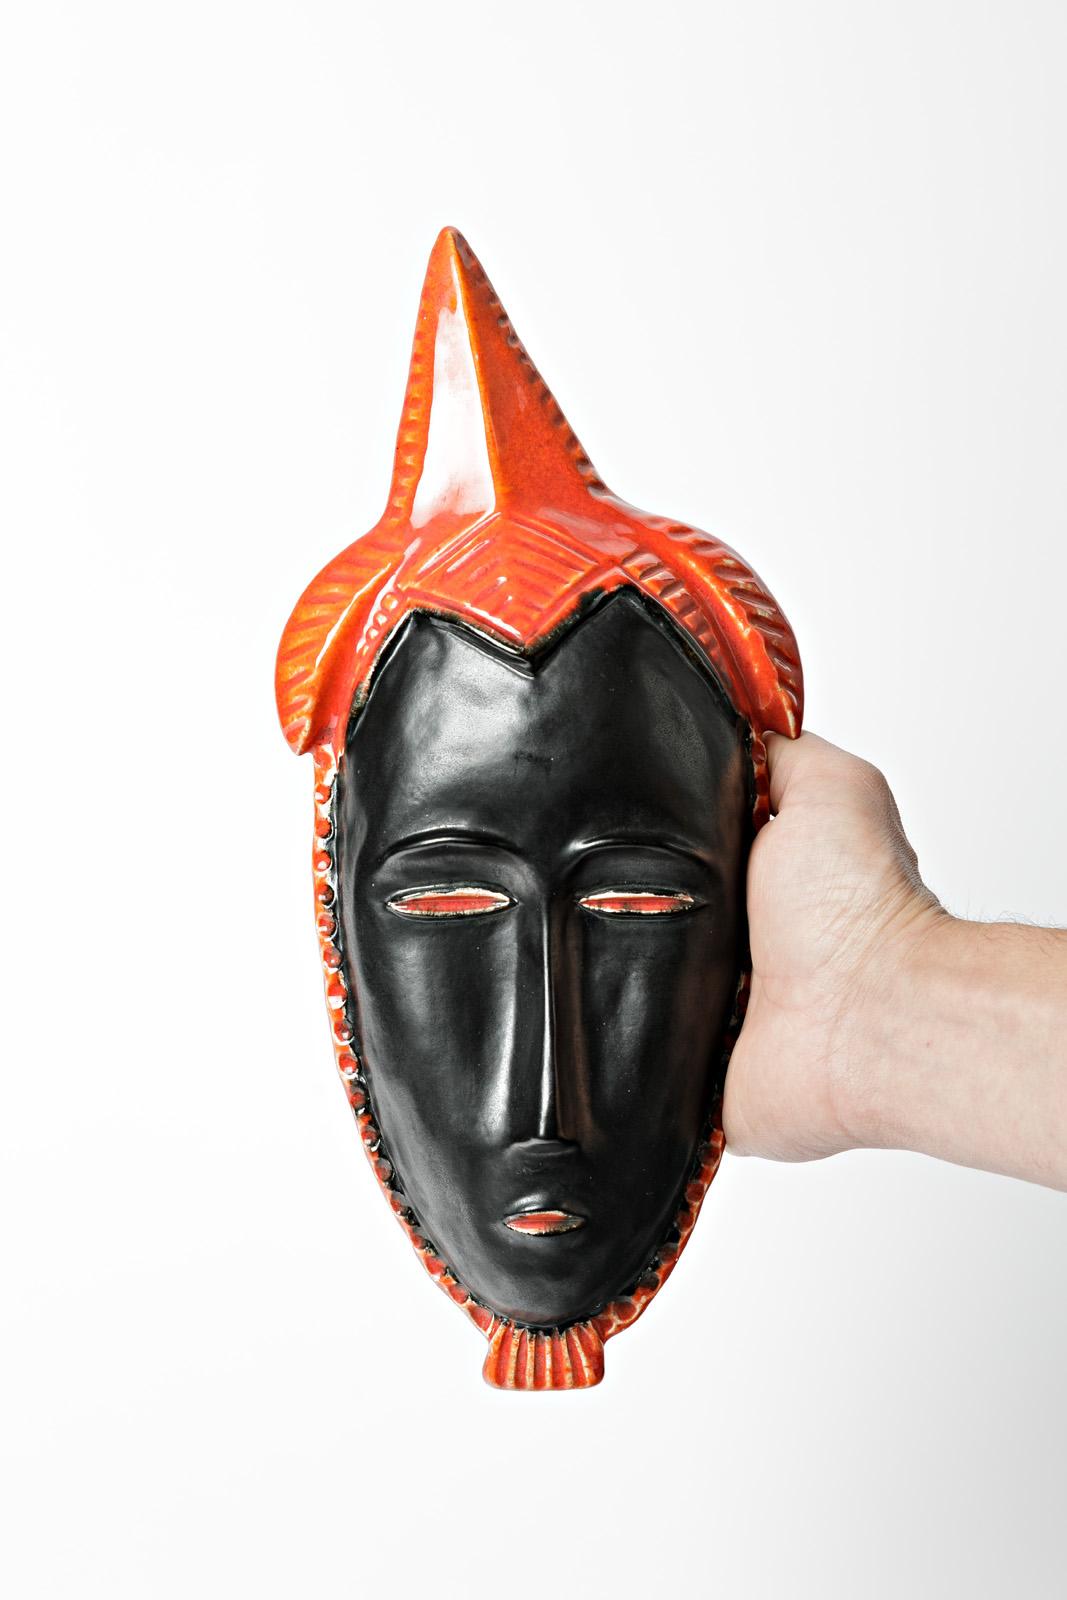 20th Century Large Black and Orange Ceramic Mask by Missy Annecy, circa 1950 For Sale 1